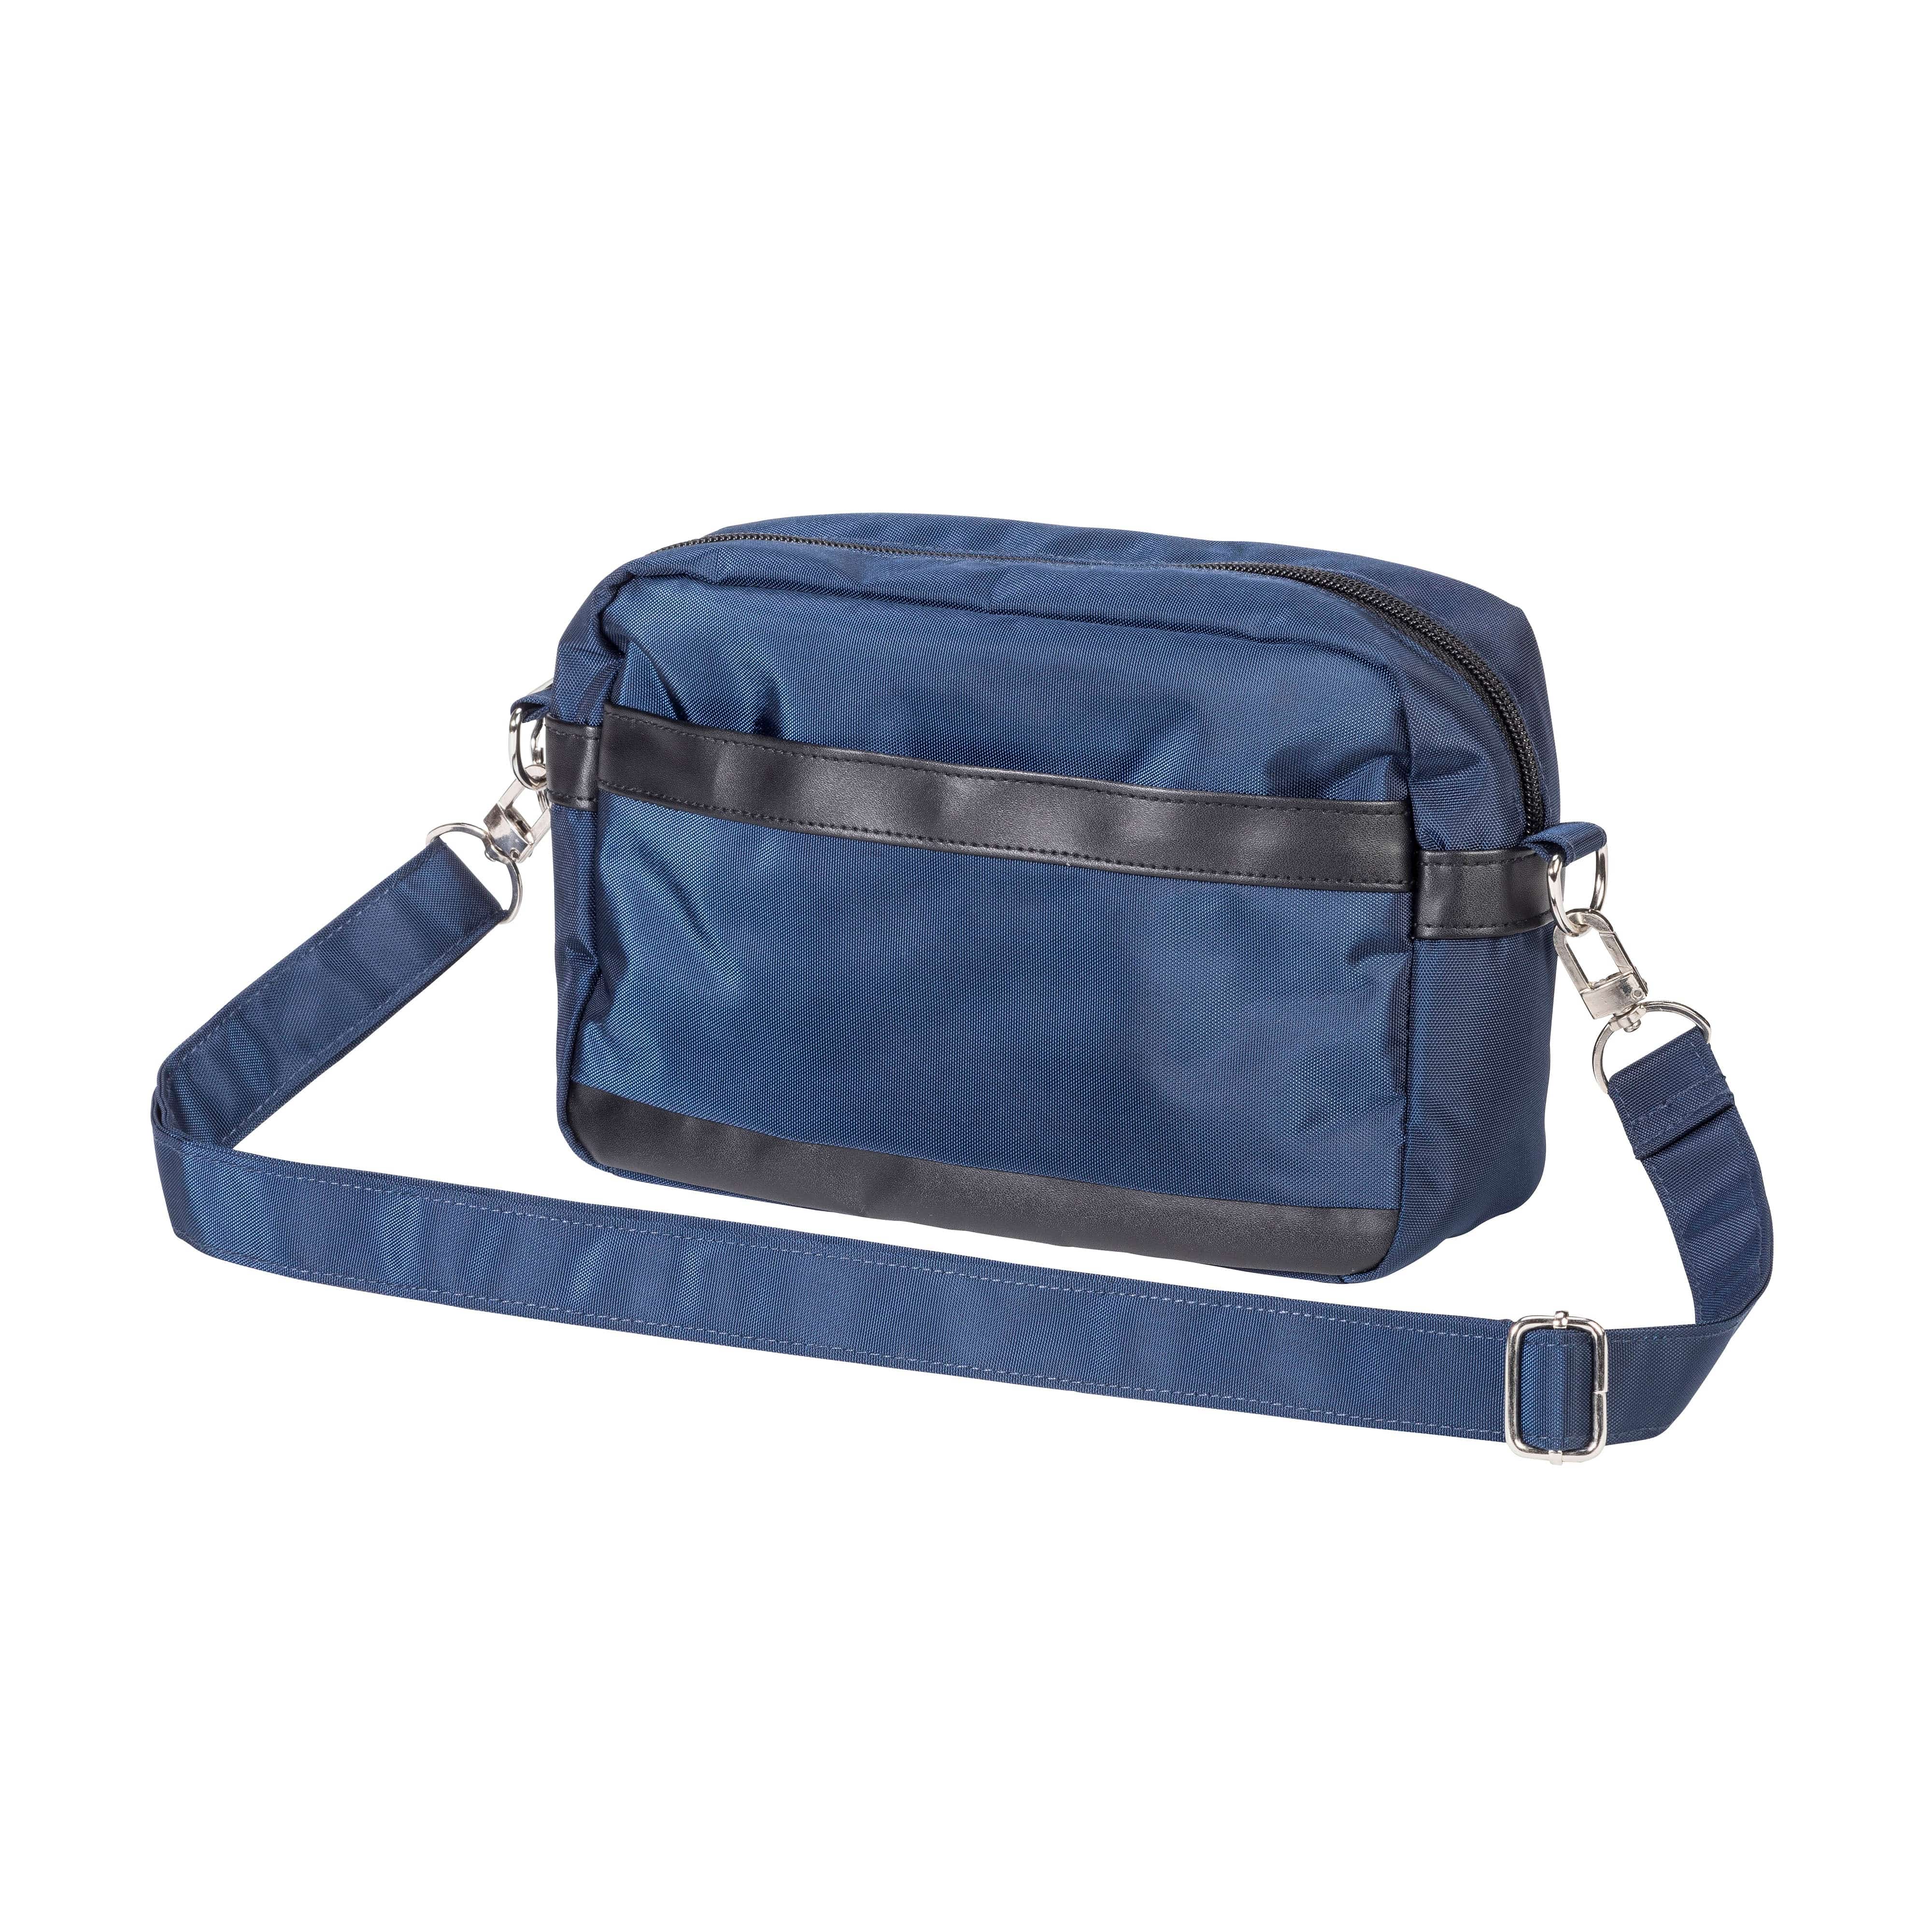 Drive Medical Walkers/Walker Accessories/Walker Carry Pouches and Baskets Navy Drive Medical Multi-Use Accessory Bag